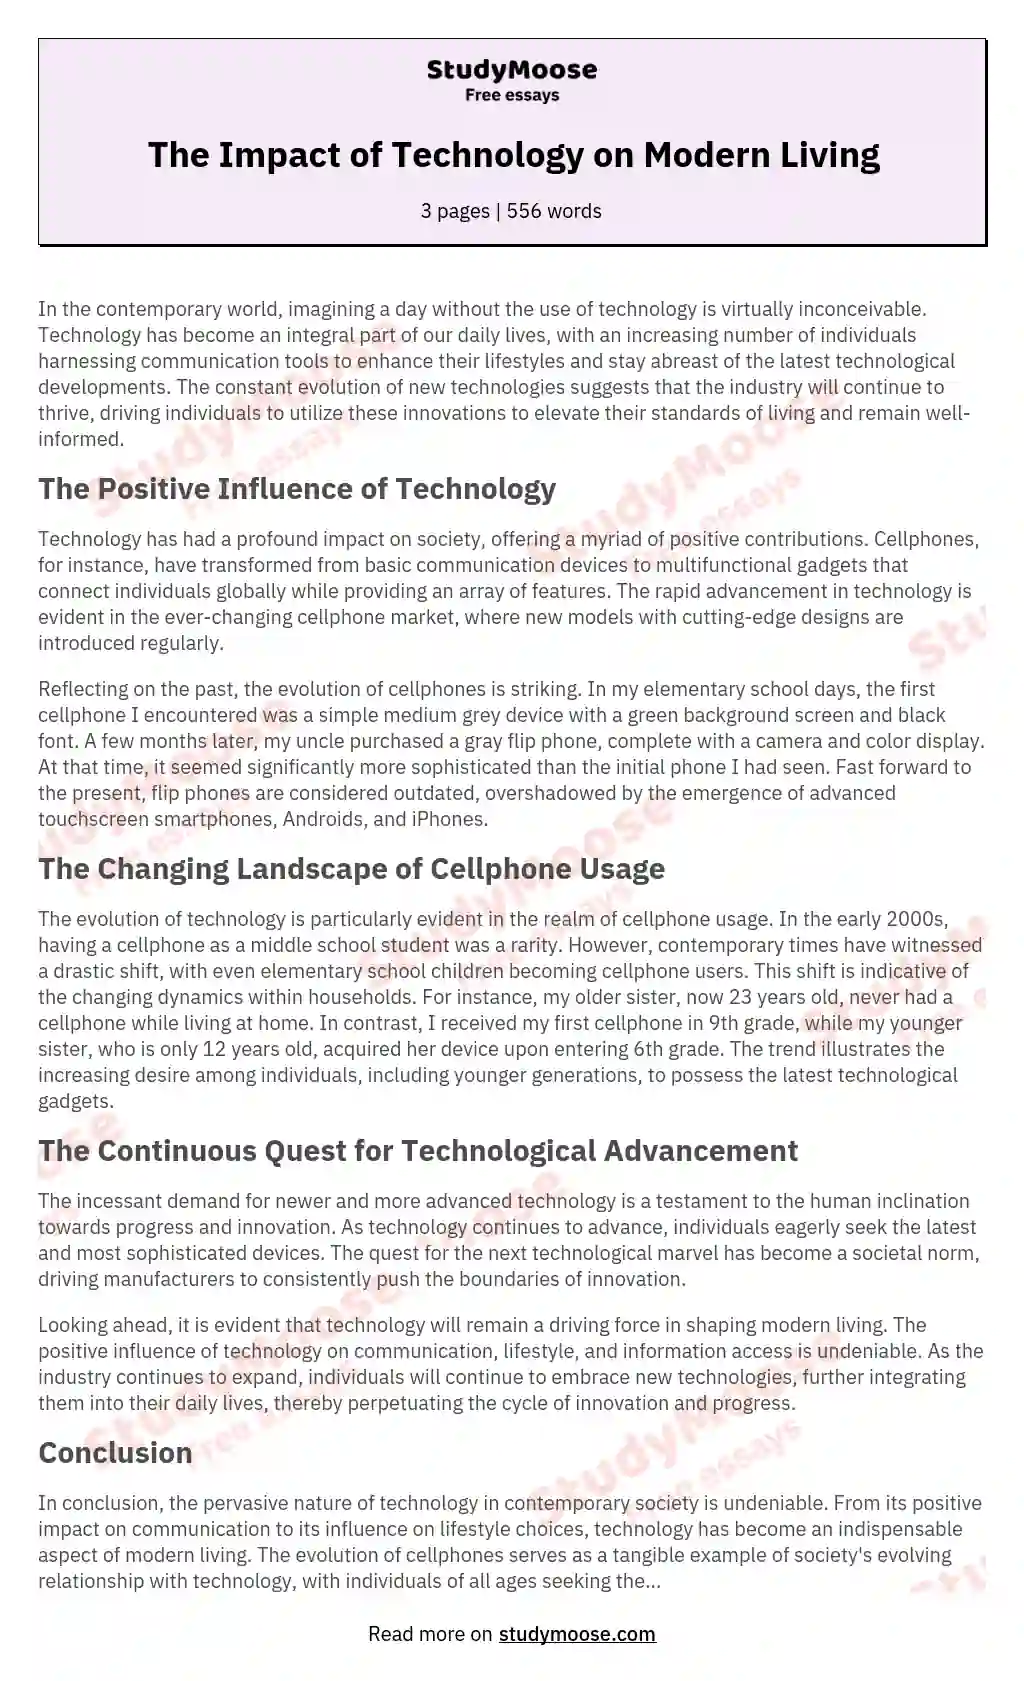 The Impact of Technology on Modern Living essay